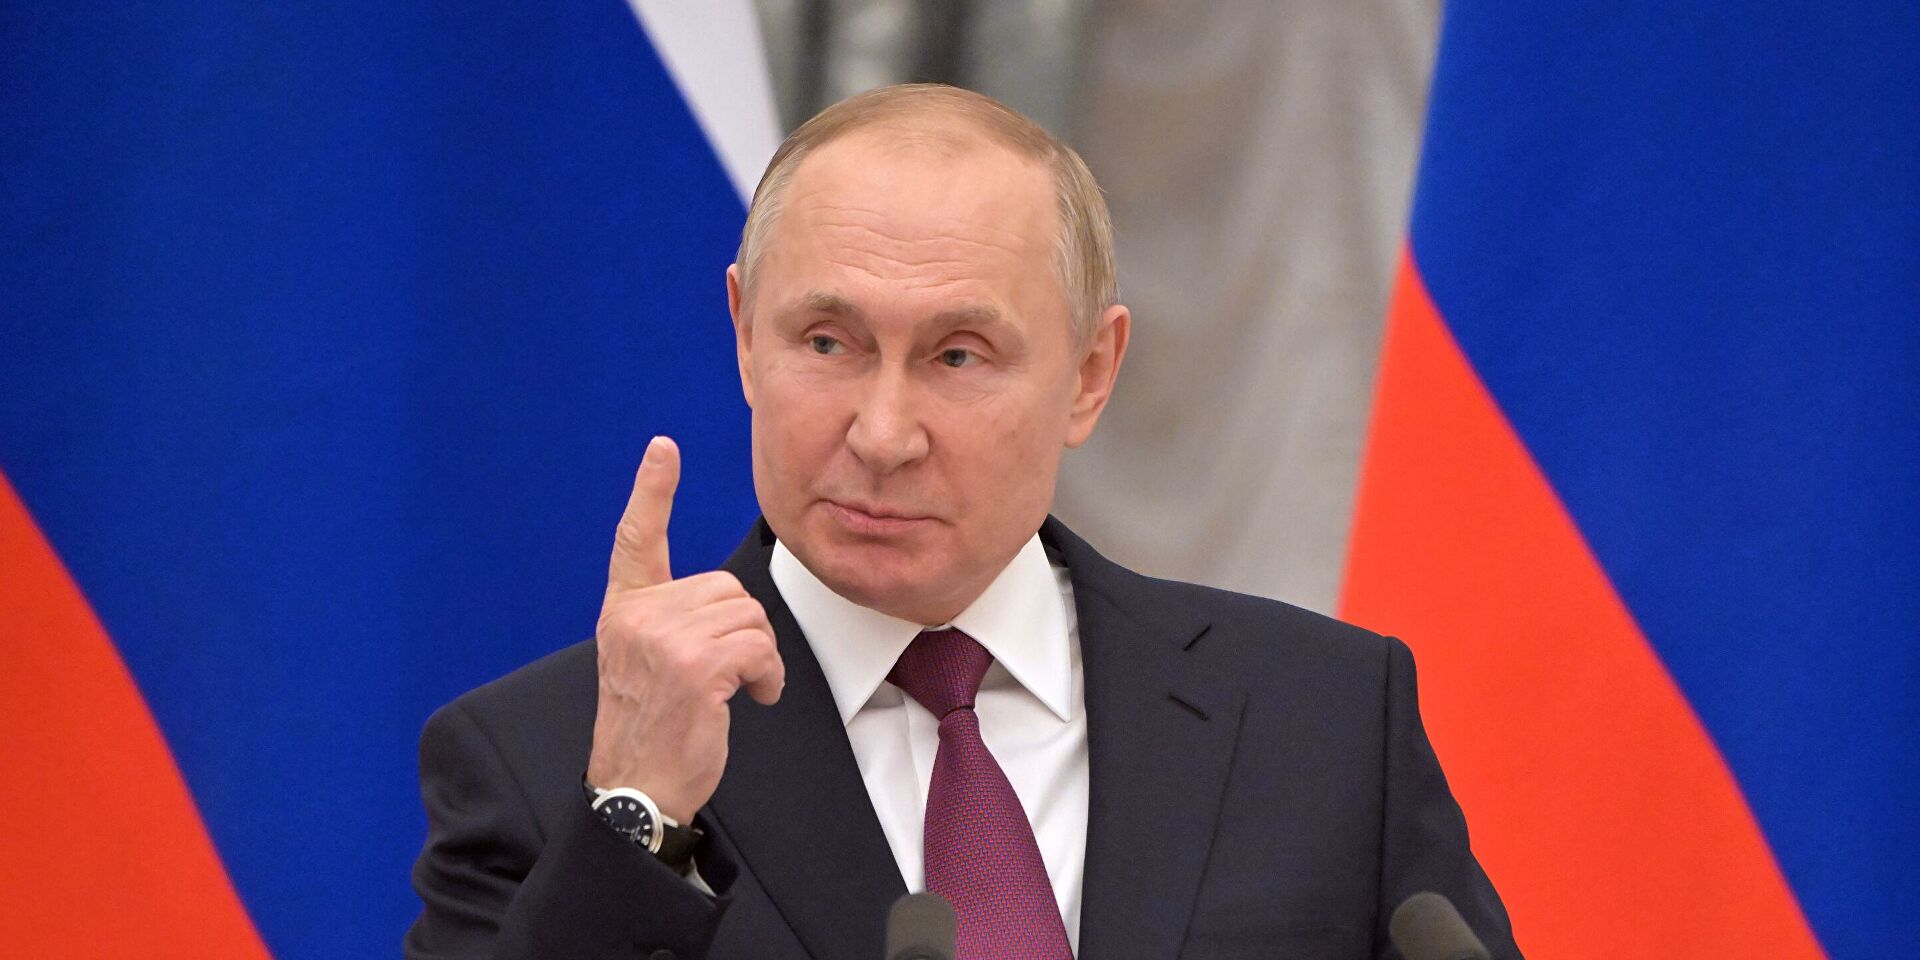 Putin punctured the defensive bubble of the European Union - ВПК.name